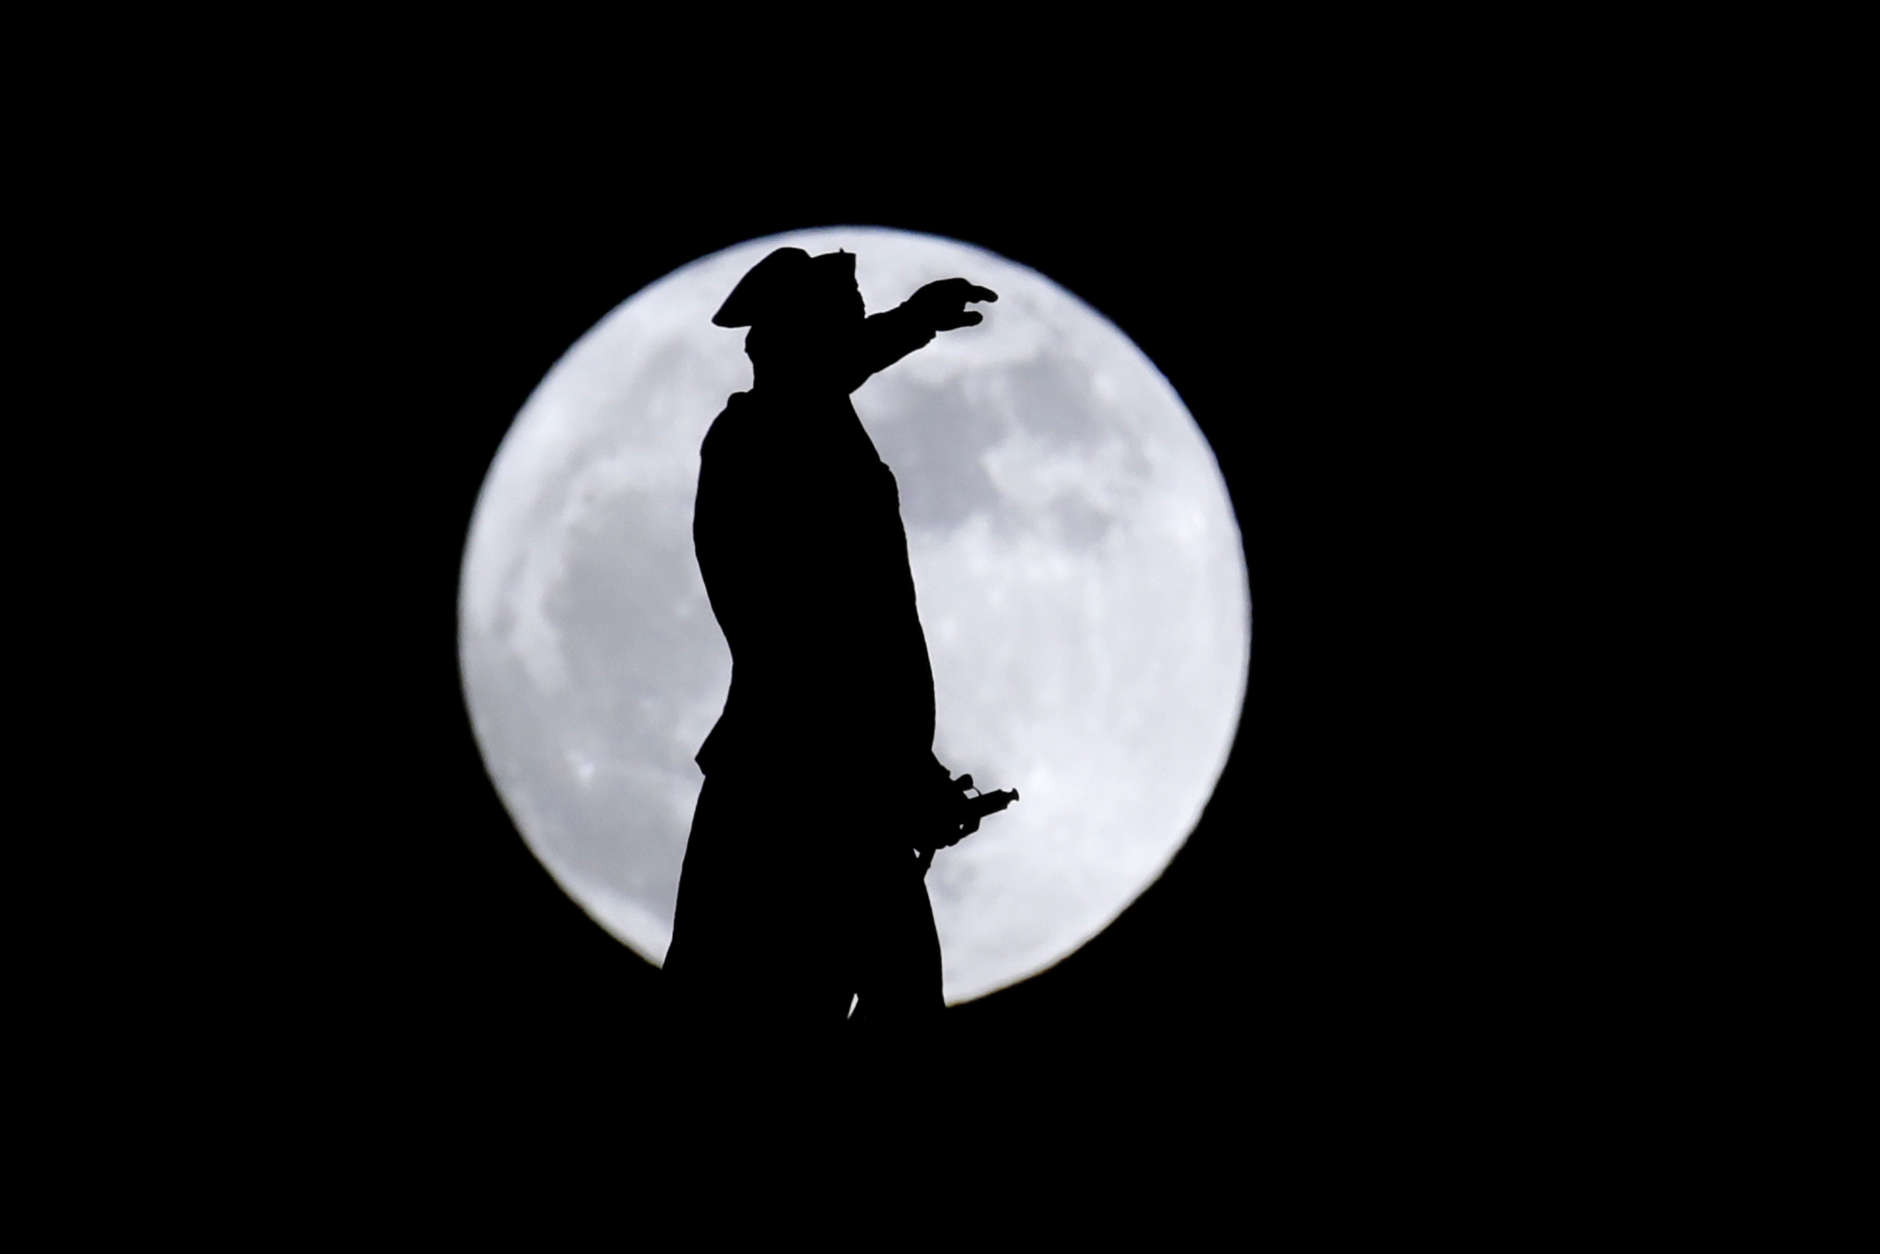 A bronze statue of General George Washington by William Rudolf O'Donovan stands on top of the Trenton Battle Monument while silhouetted by a supermoon, Monday, Jan. 1, 2018, in Trenton, N.J. The monument commemorates the victory at the first Battle of Trenton, which occurred on Dec. 26, 1776, and is located where the artillery dominated the streets of Trenton, preventing the Hessian troops from organizing attacks. Monday's moon is the second of three consecutive supermoons. The first occurred Dec. 3, 2017, and the next will happen on Jan. 31, 2018. (AP Photo/Julio Cortez)